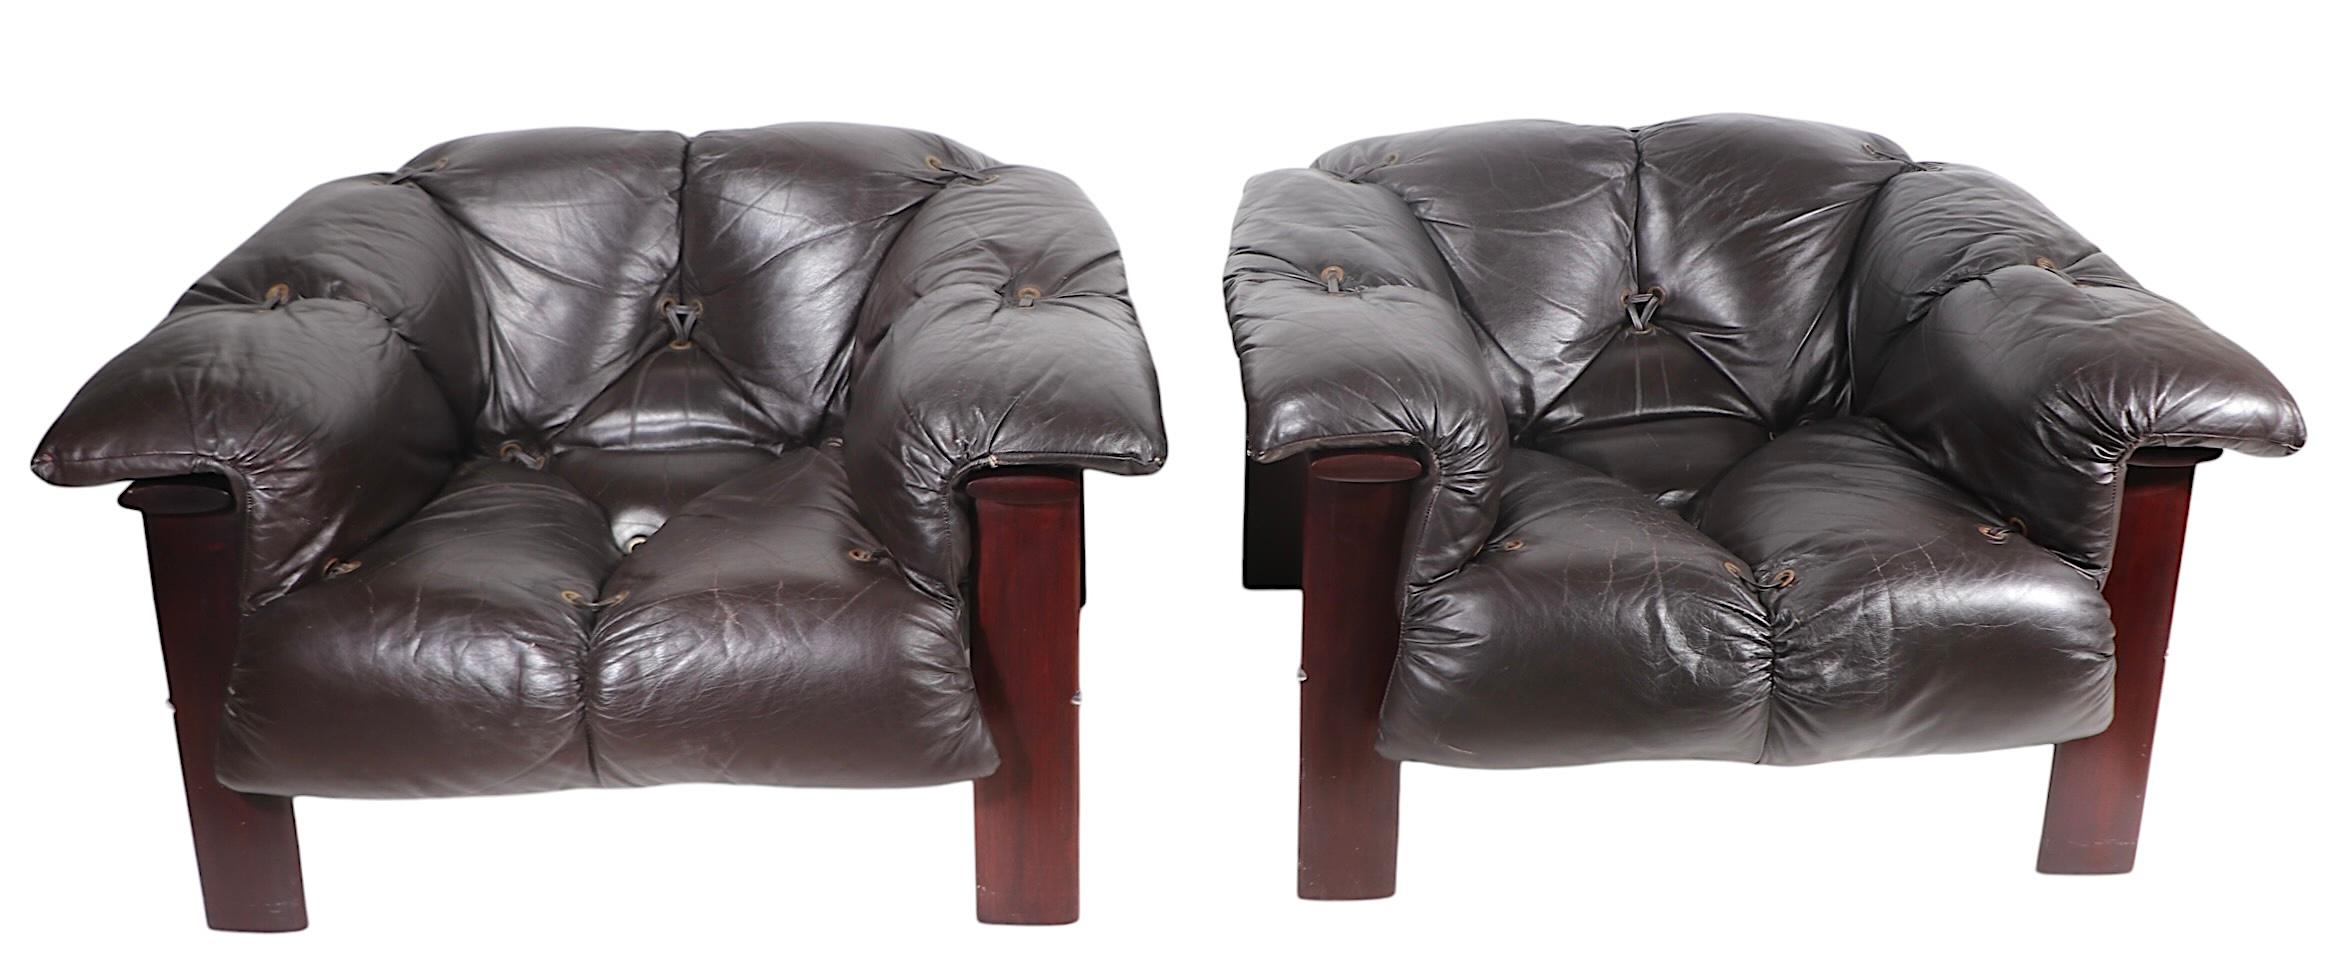 20th Century Pr. Lounge Chairs by Percival Lafer made in Brazil c. 1970’s For Sale